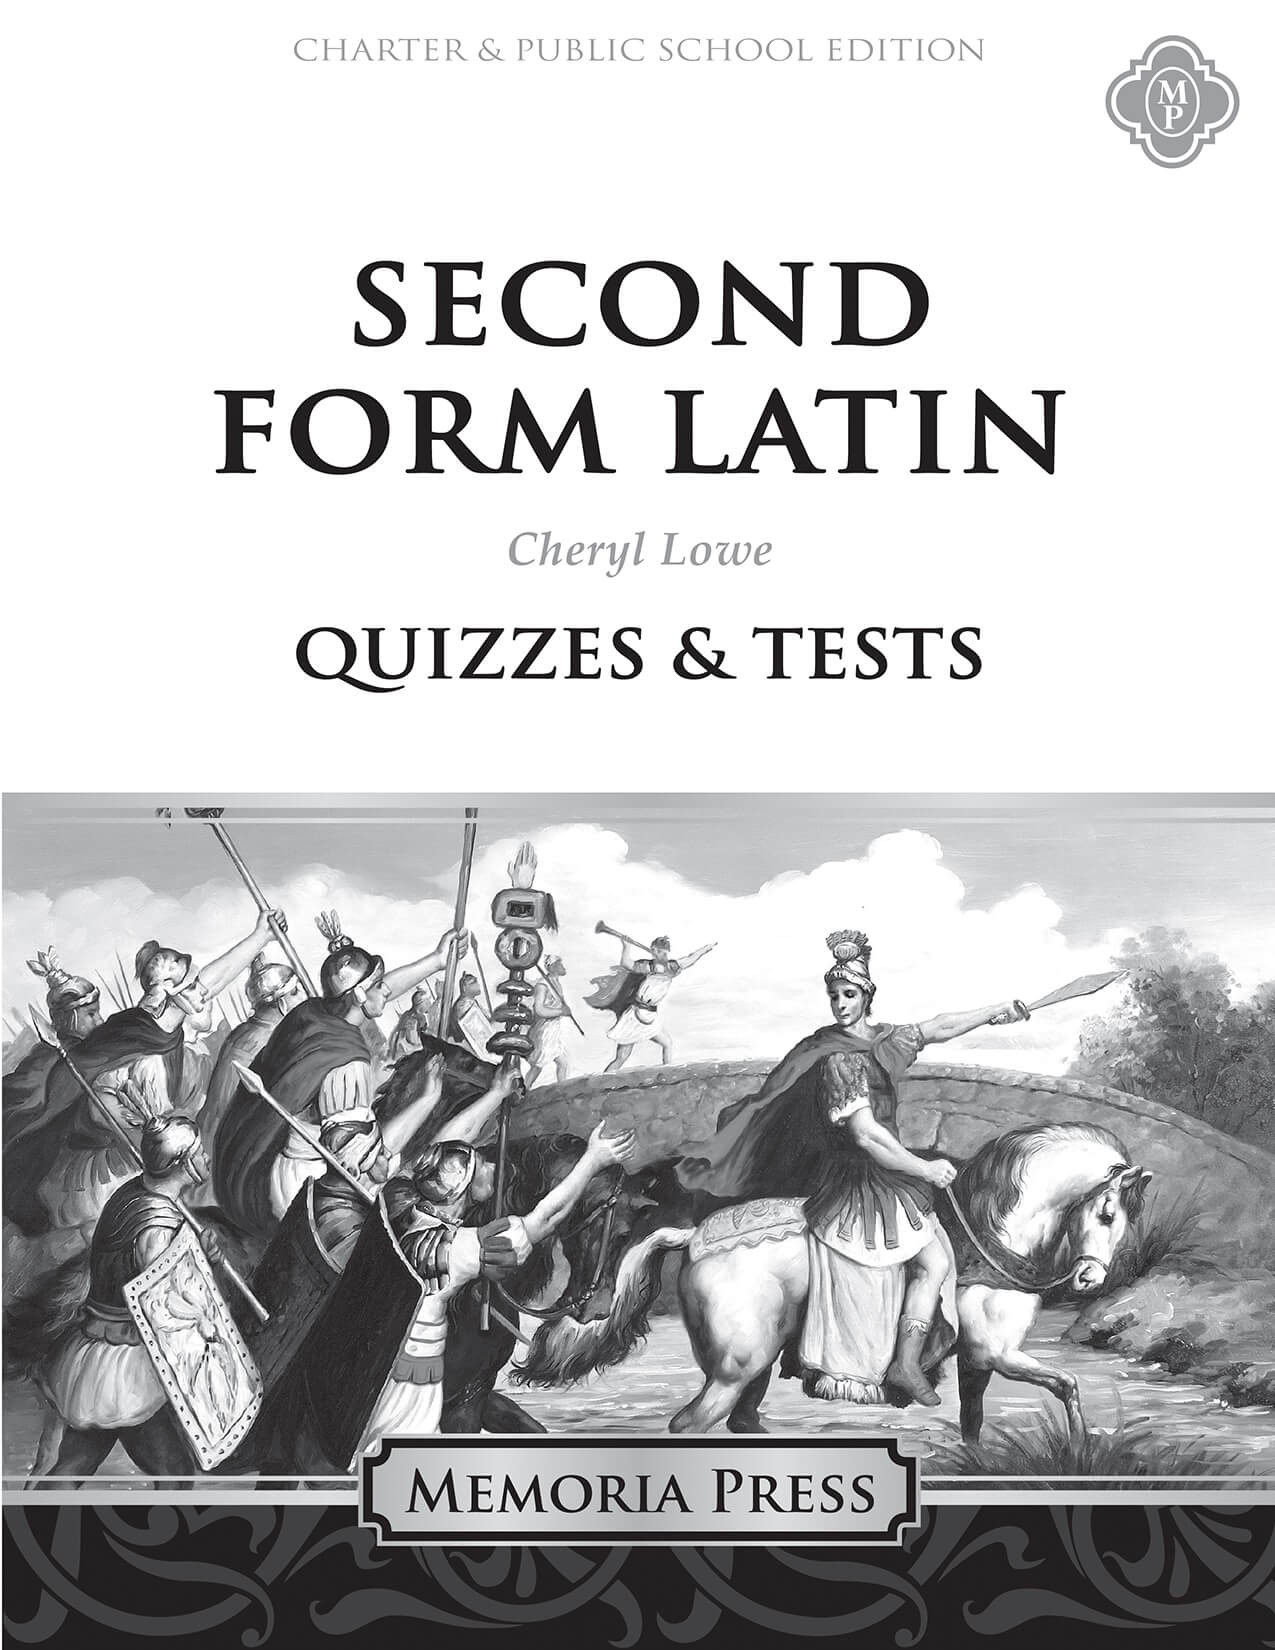 Second Form Latin Quizzes and Tests-Charter/Public Edition